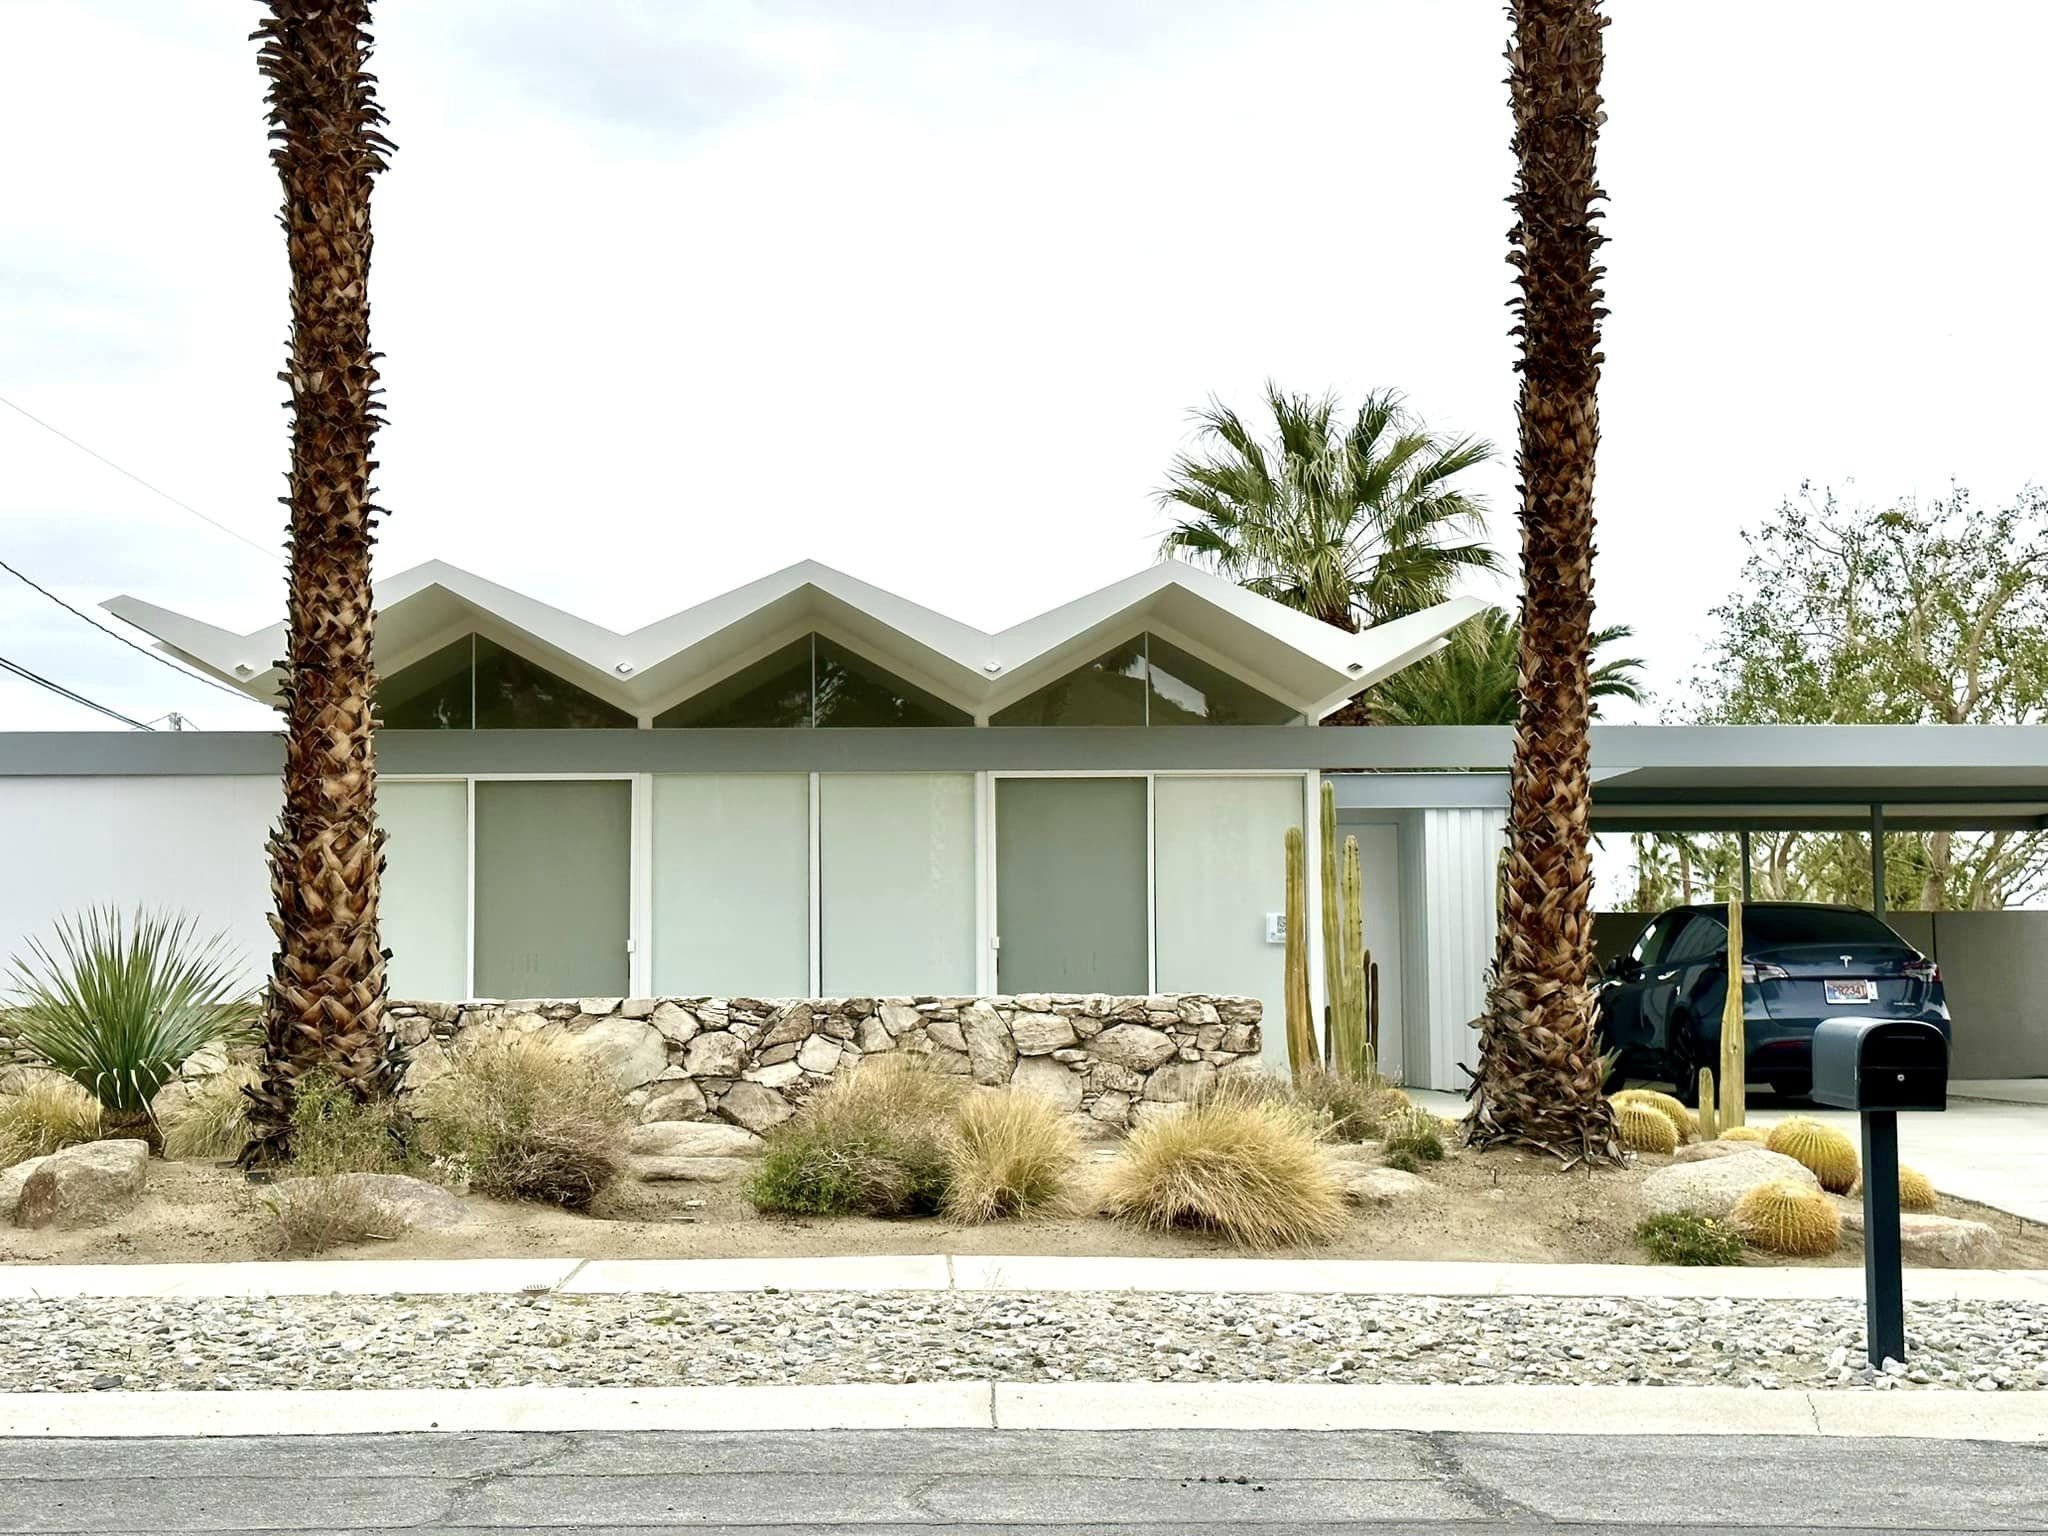  Designed to be pre-fab all steel homes by Donald Wexler and Richard Harrison. 